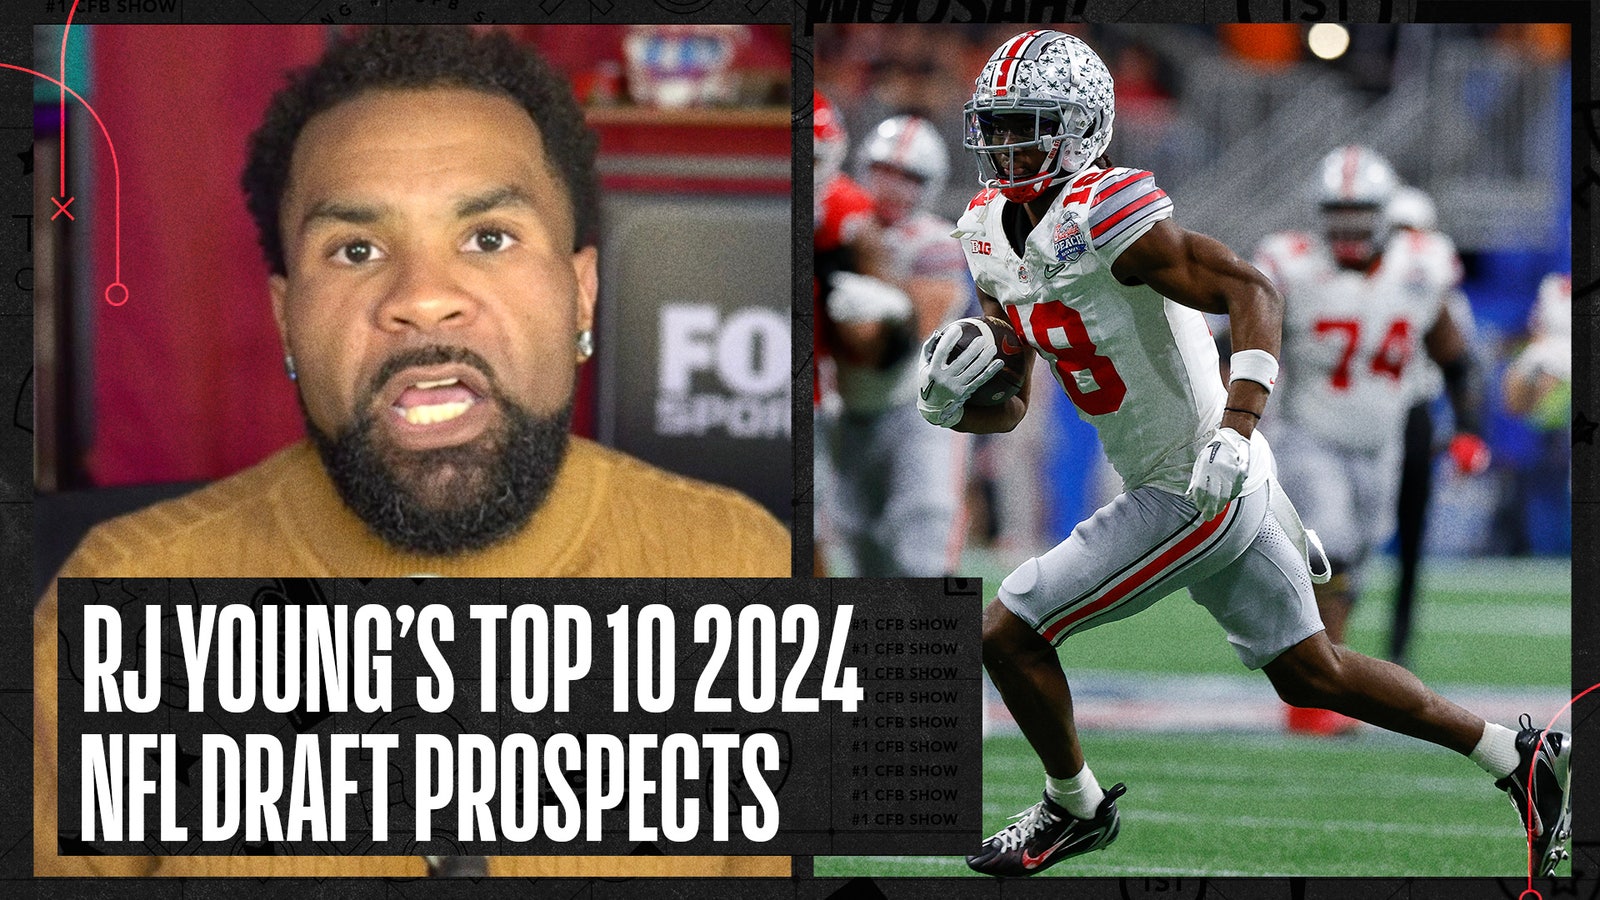 RJ Young's Top 10 2024 NFL Draft prospects ft. Marvin Harrison Jr. & Drake Maye| No. 1 CFB Show